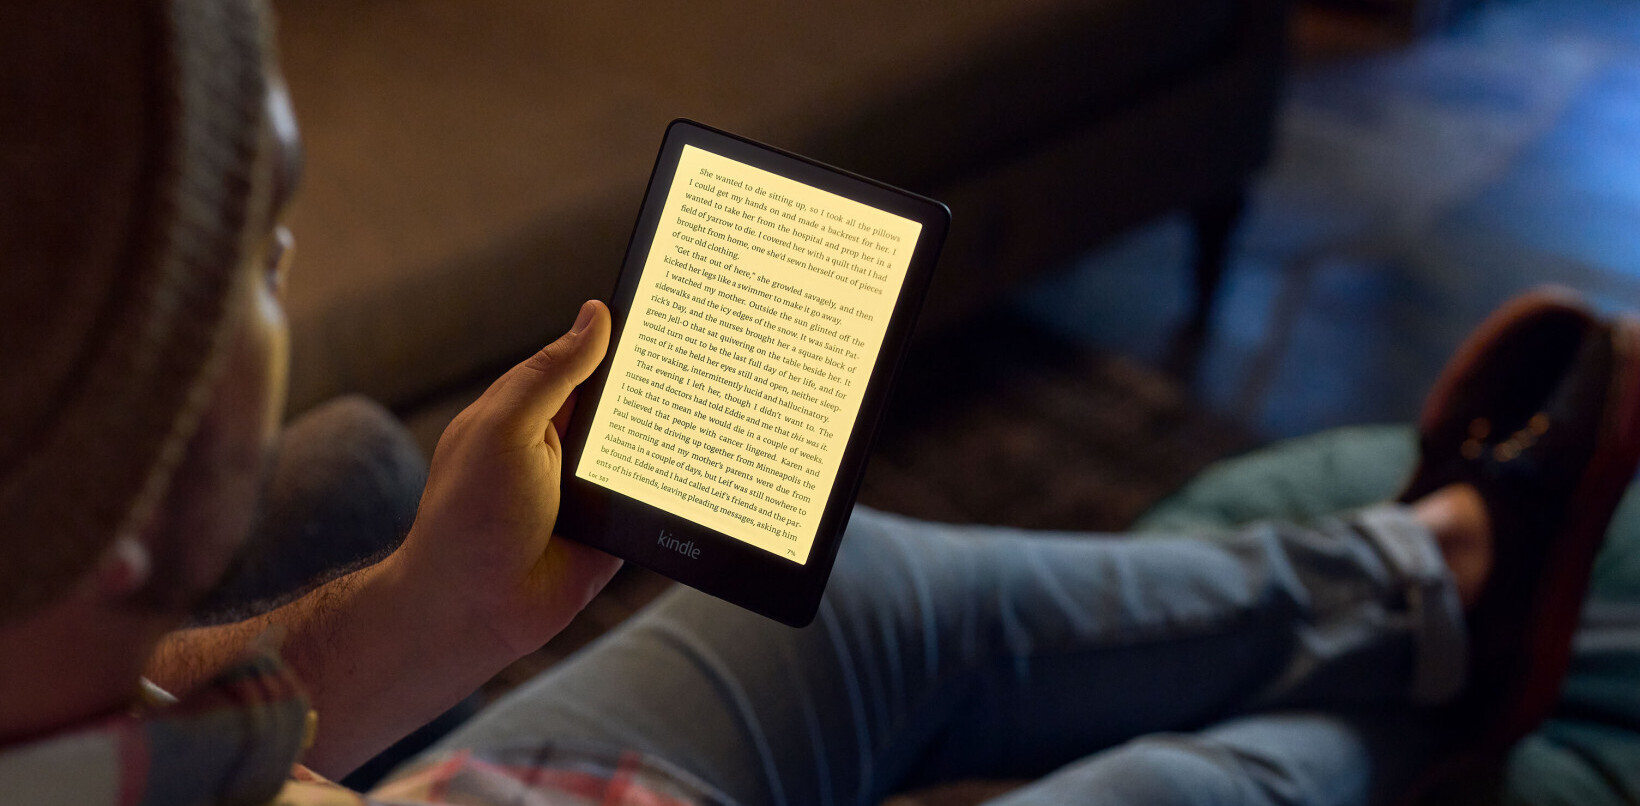 Amazon’s new Kindle Paperwhite won’t sear your eyeballs with blue light